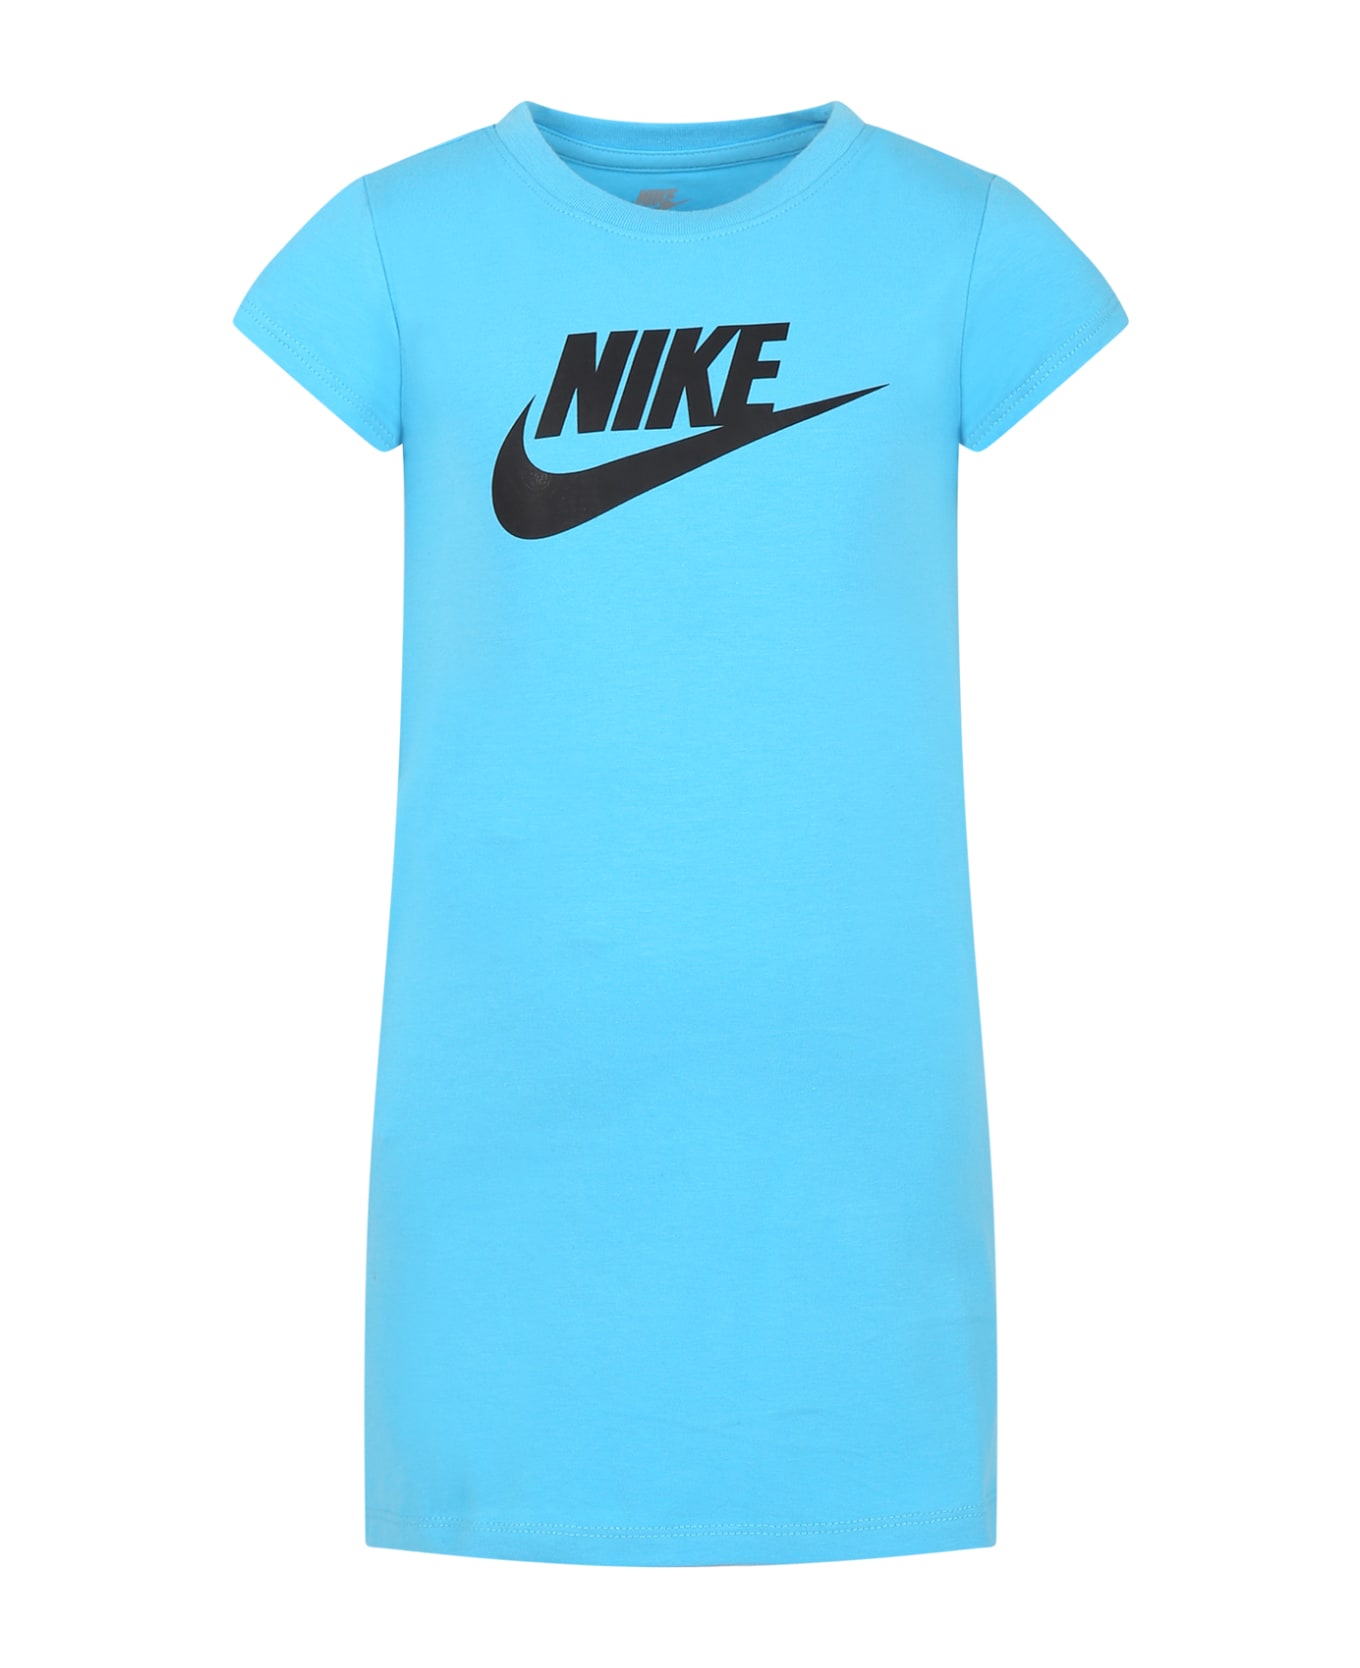 Nike Light Blue Dress For Girl With Iconic Swoosh - Light Blue